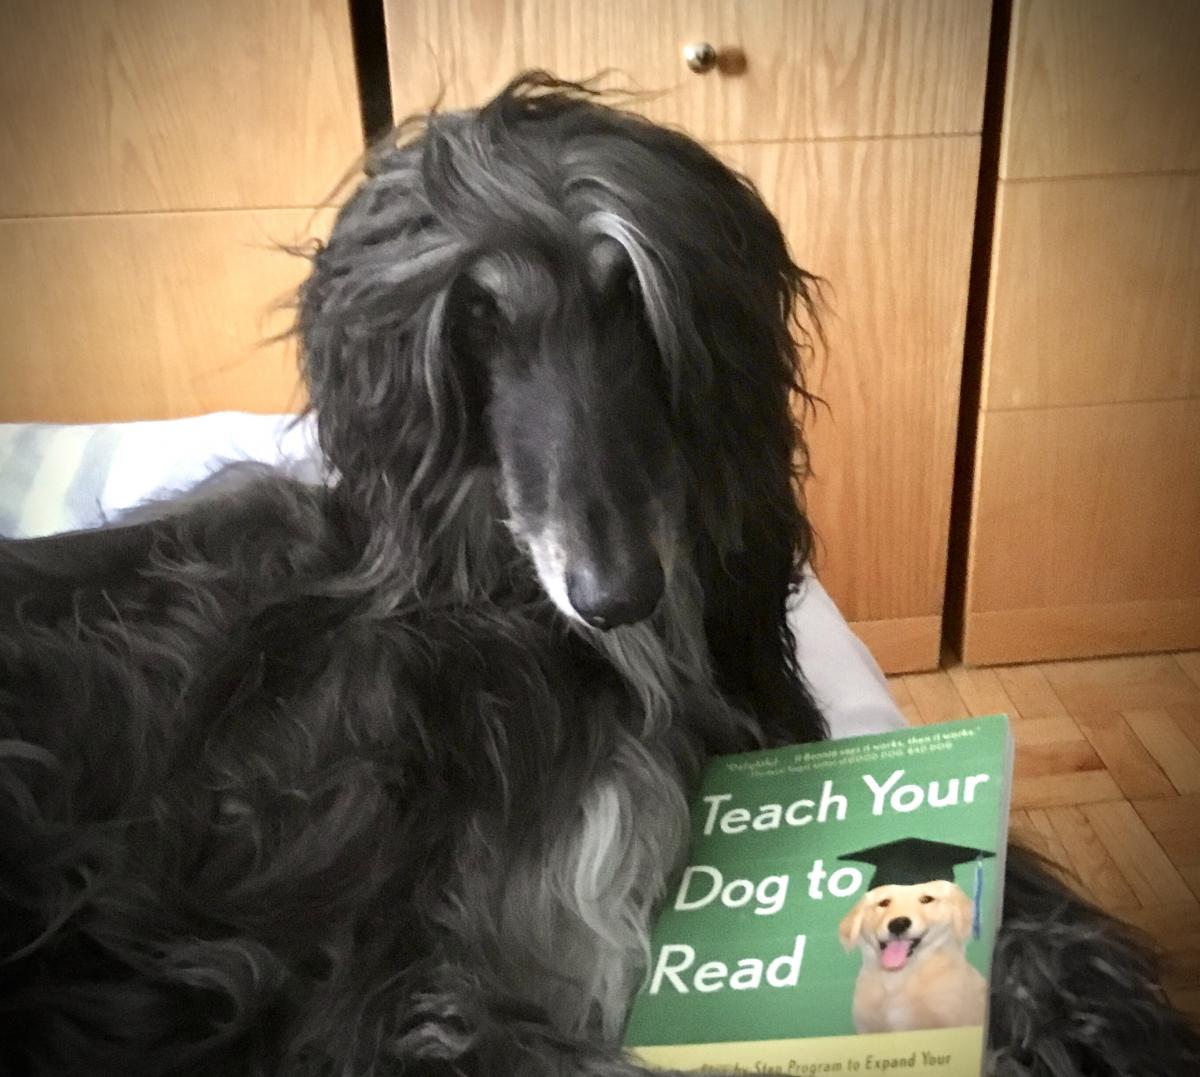 Setareh Wagner and Teach Your Dog to Read